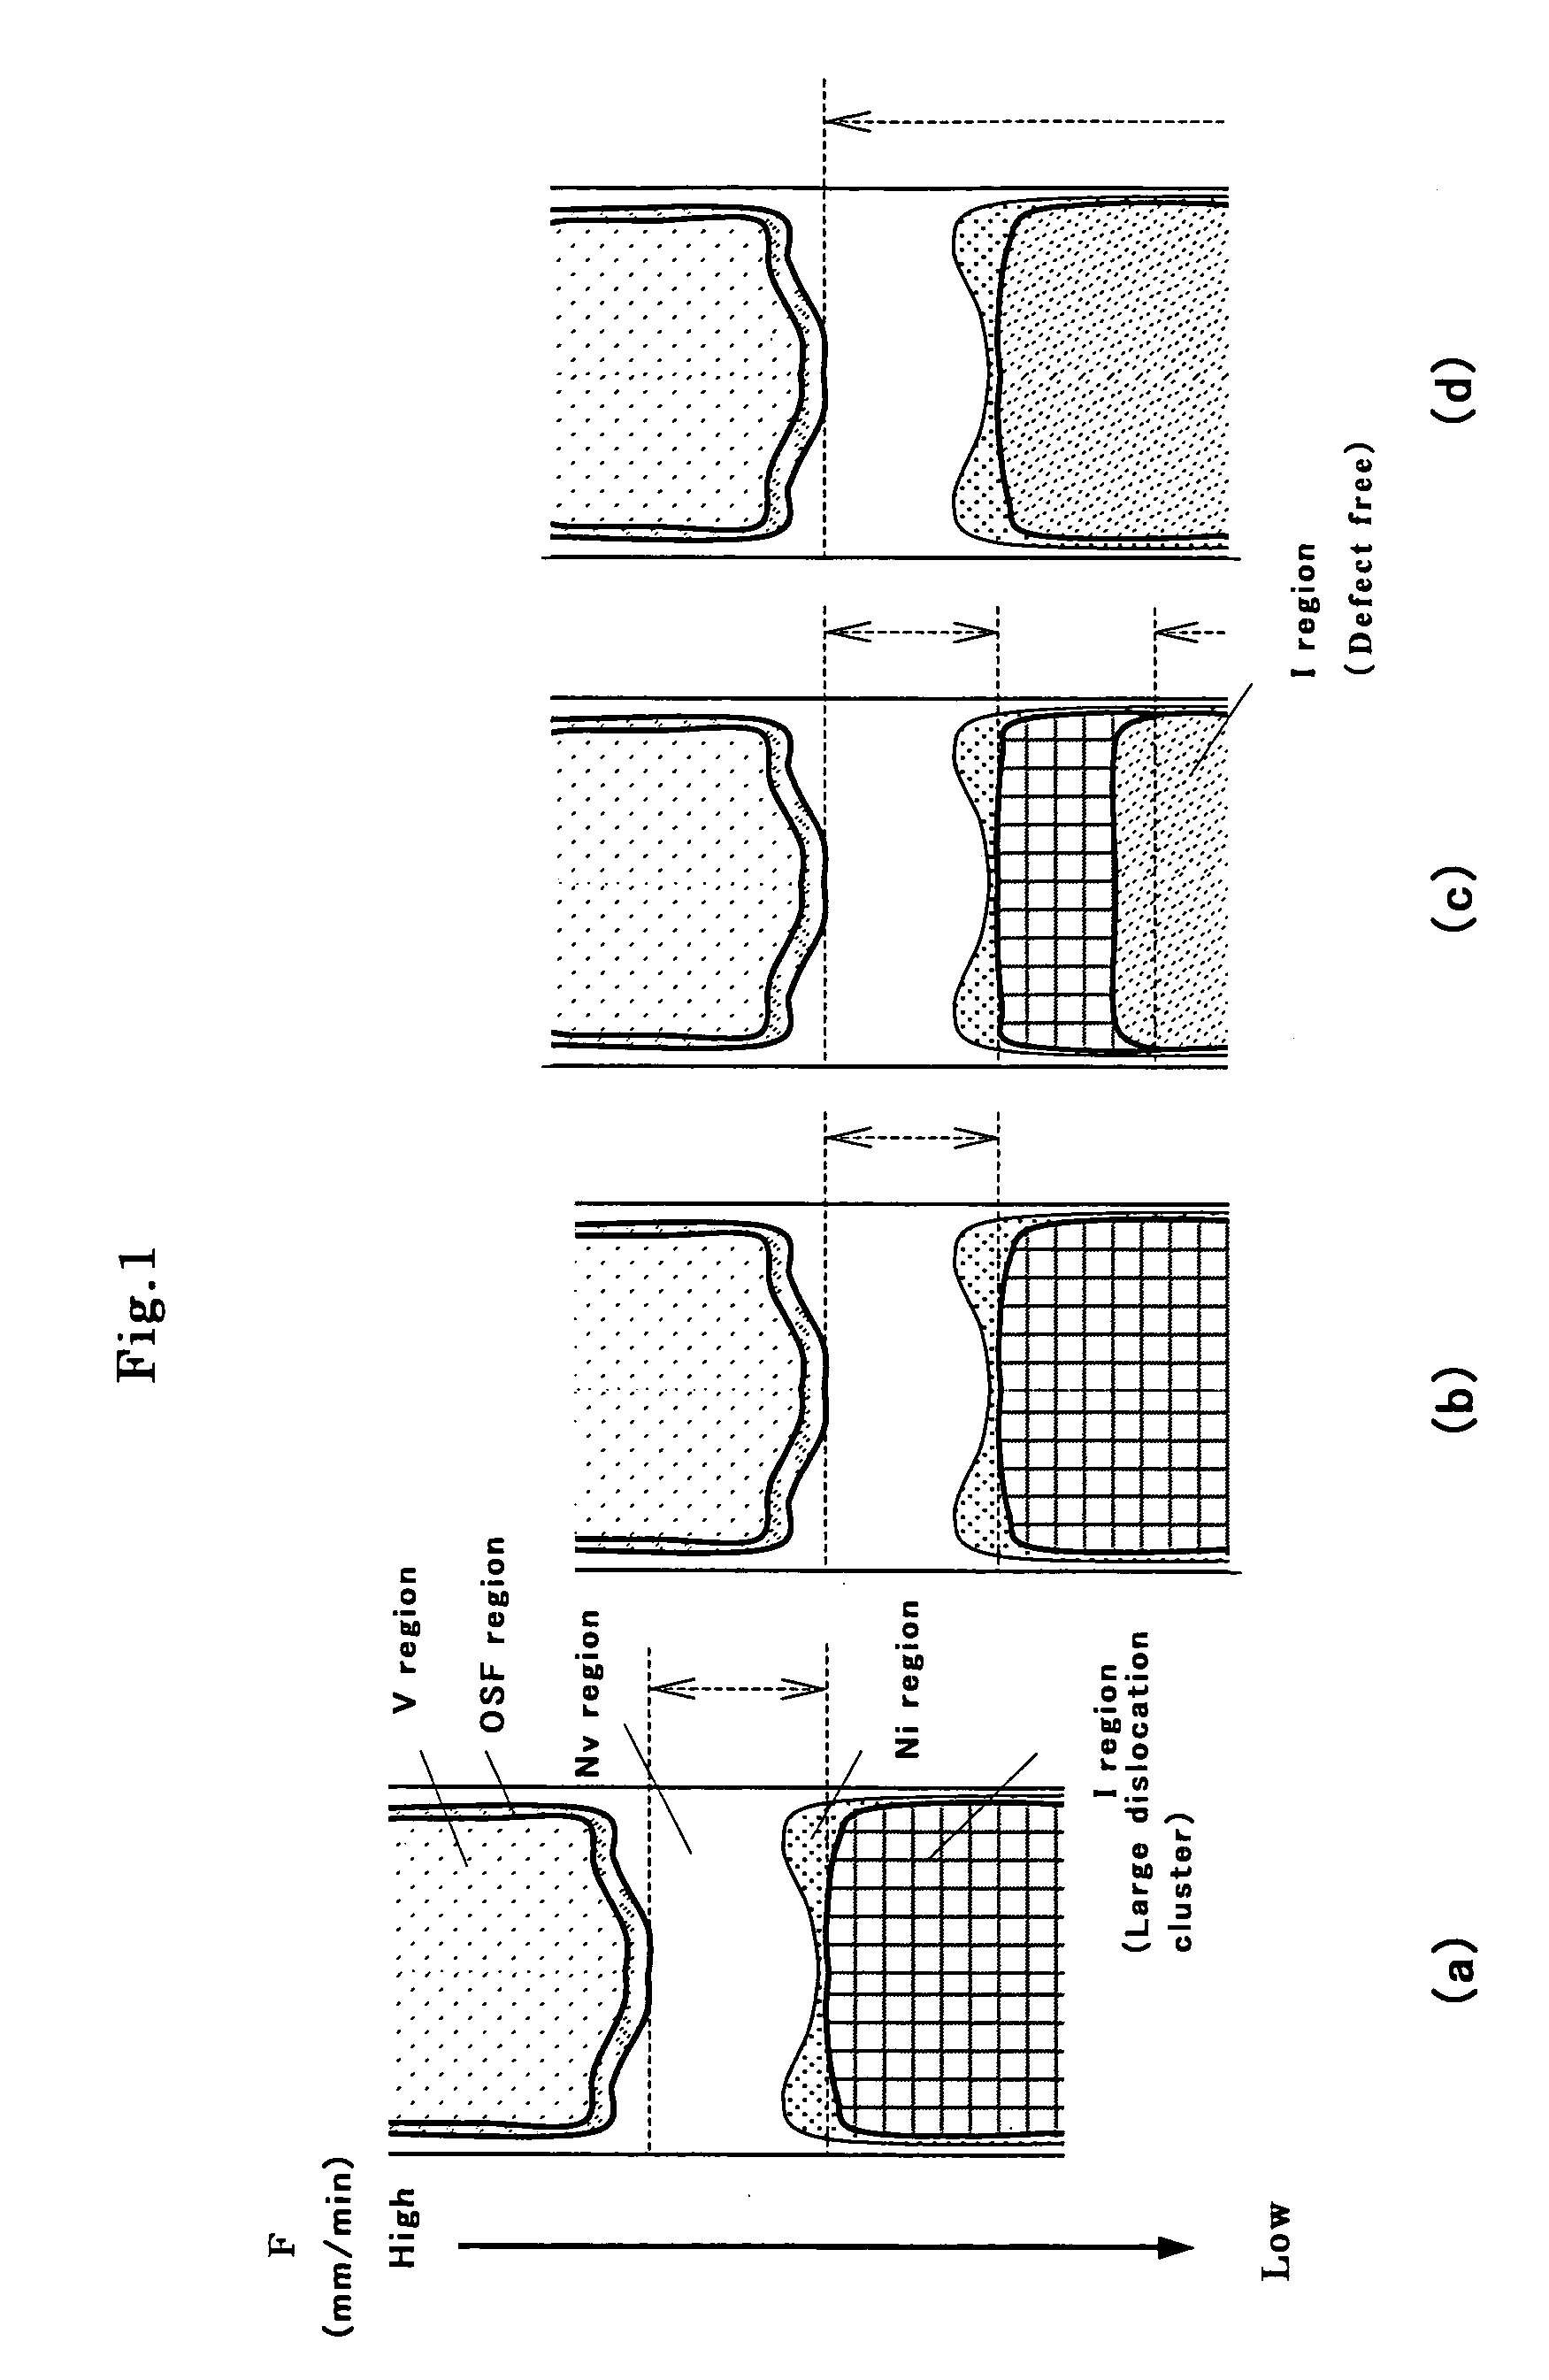 Method of producing P-doped silicon single crystal and P-doped N-type silicon single crystal wafer